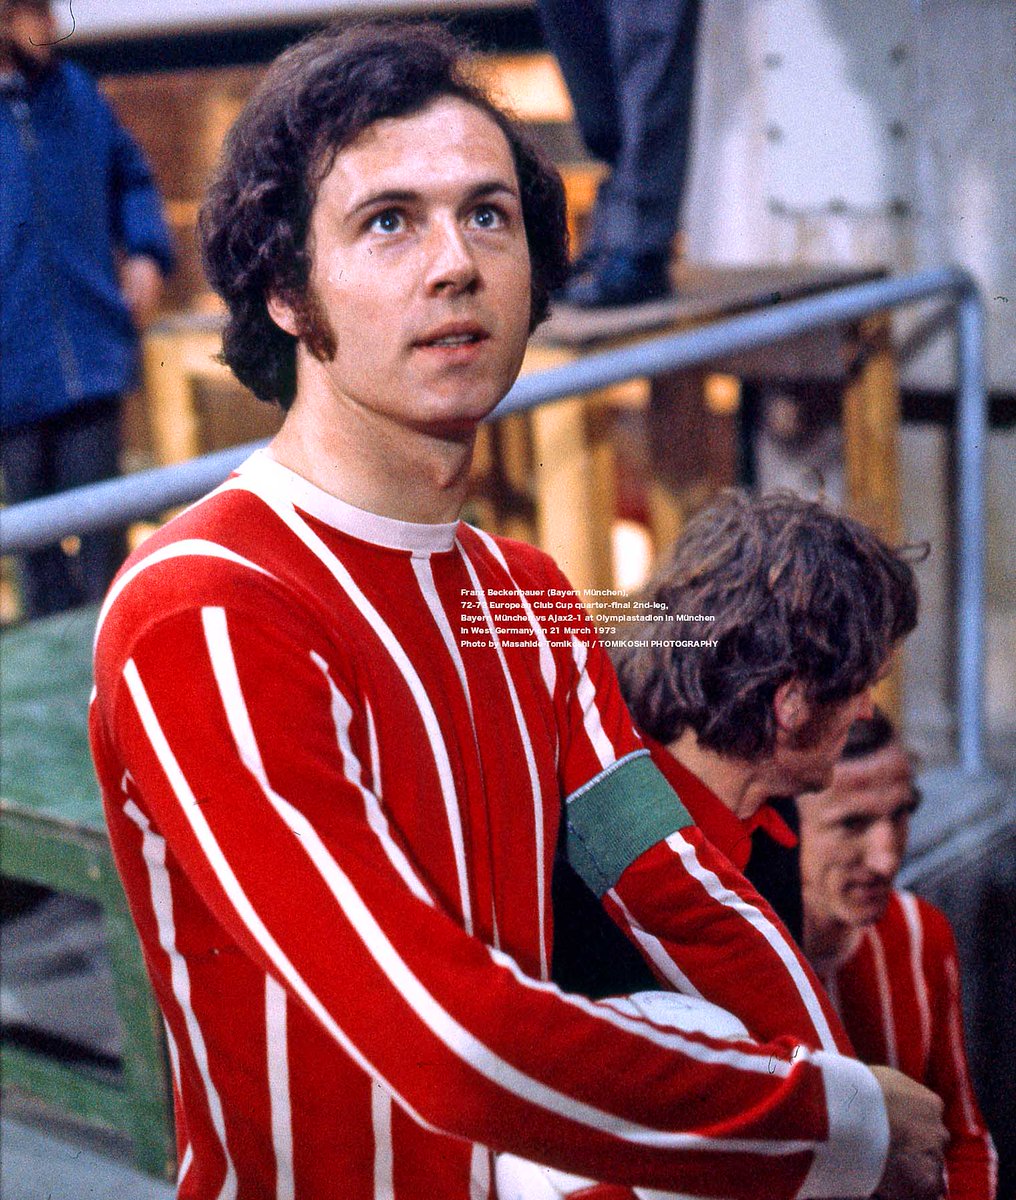 Franz Beckenbauer (Bayern München) face 72-73 European Club Cup quarter-final 2nd-leg, Bayern München vs Ajax2-1 at Olympiastadion in München in West Germany on 21 March 1973 Photo by Masahide Tomikoshi / TOMIKOSHI PHOTOGRAPHY